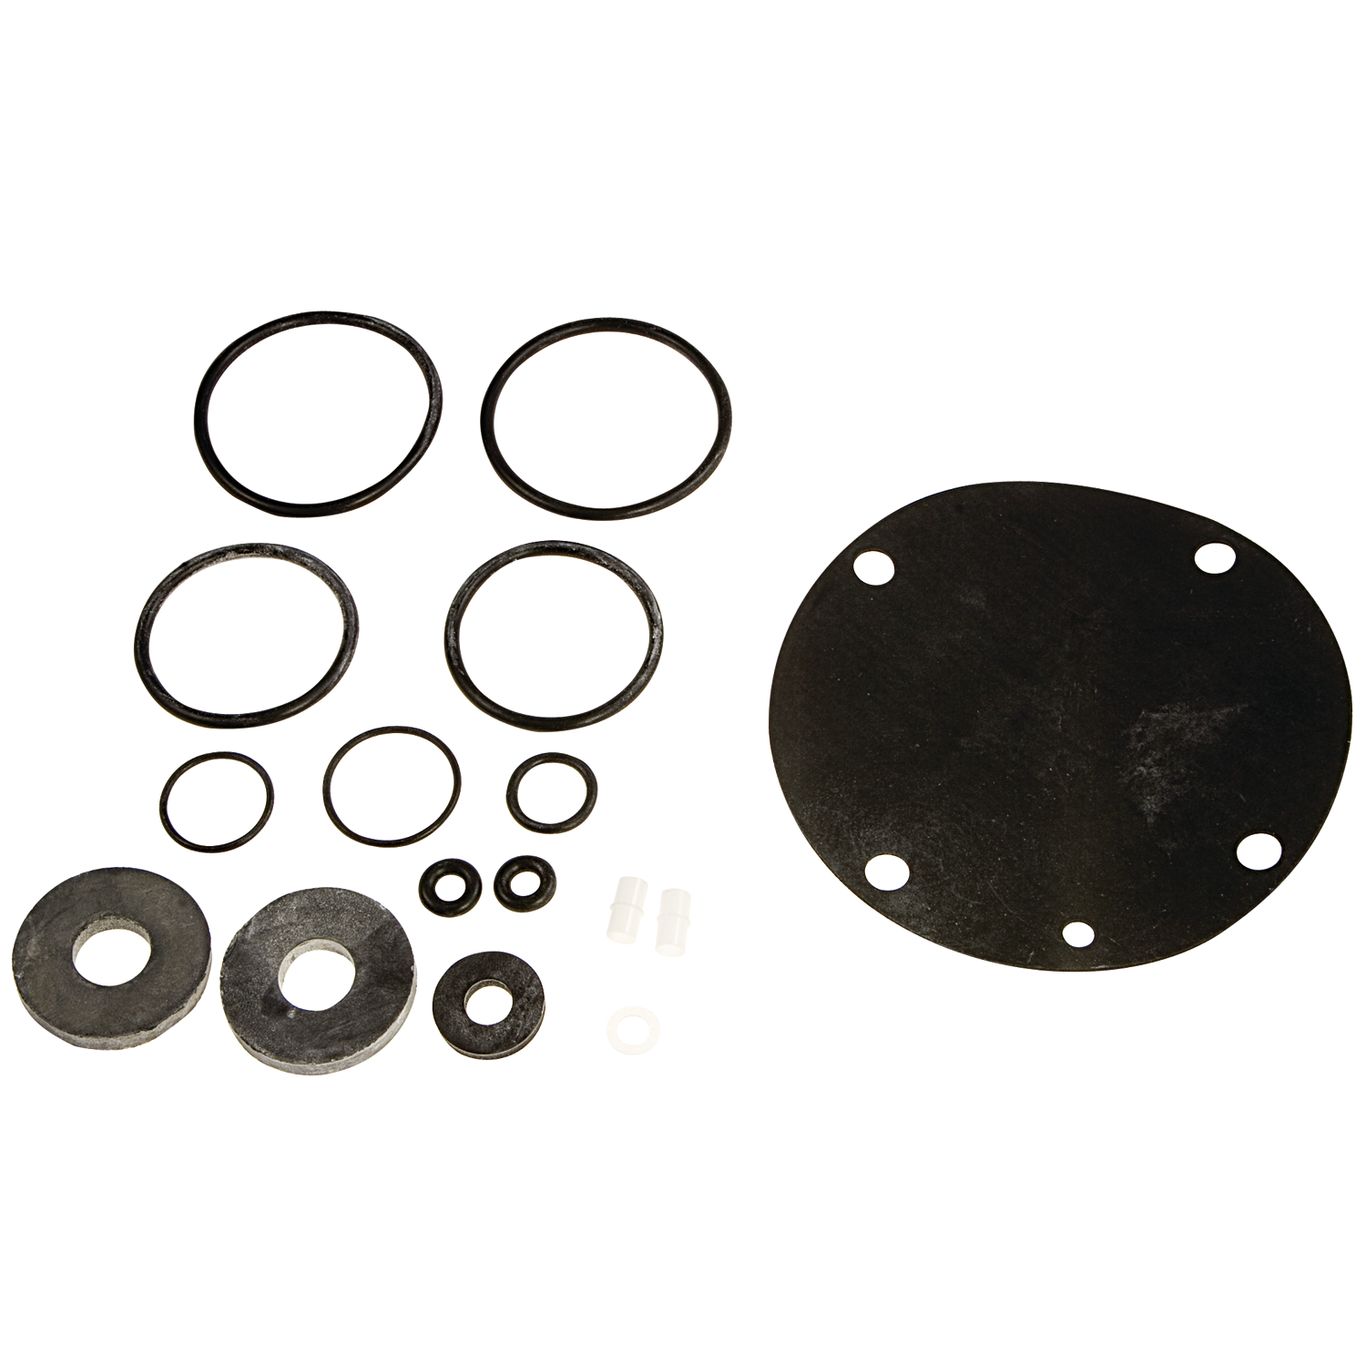 1 1/2"-2" Febco FRK 825Y-RT Rubber Parts Repair Kit